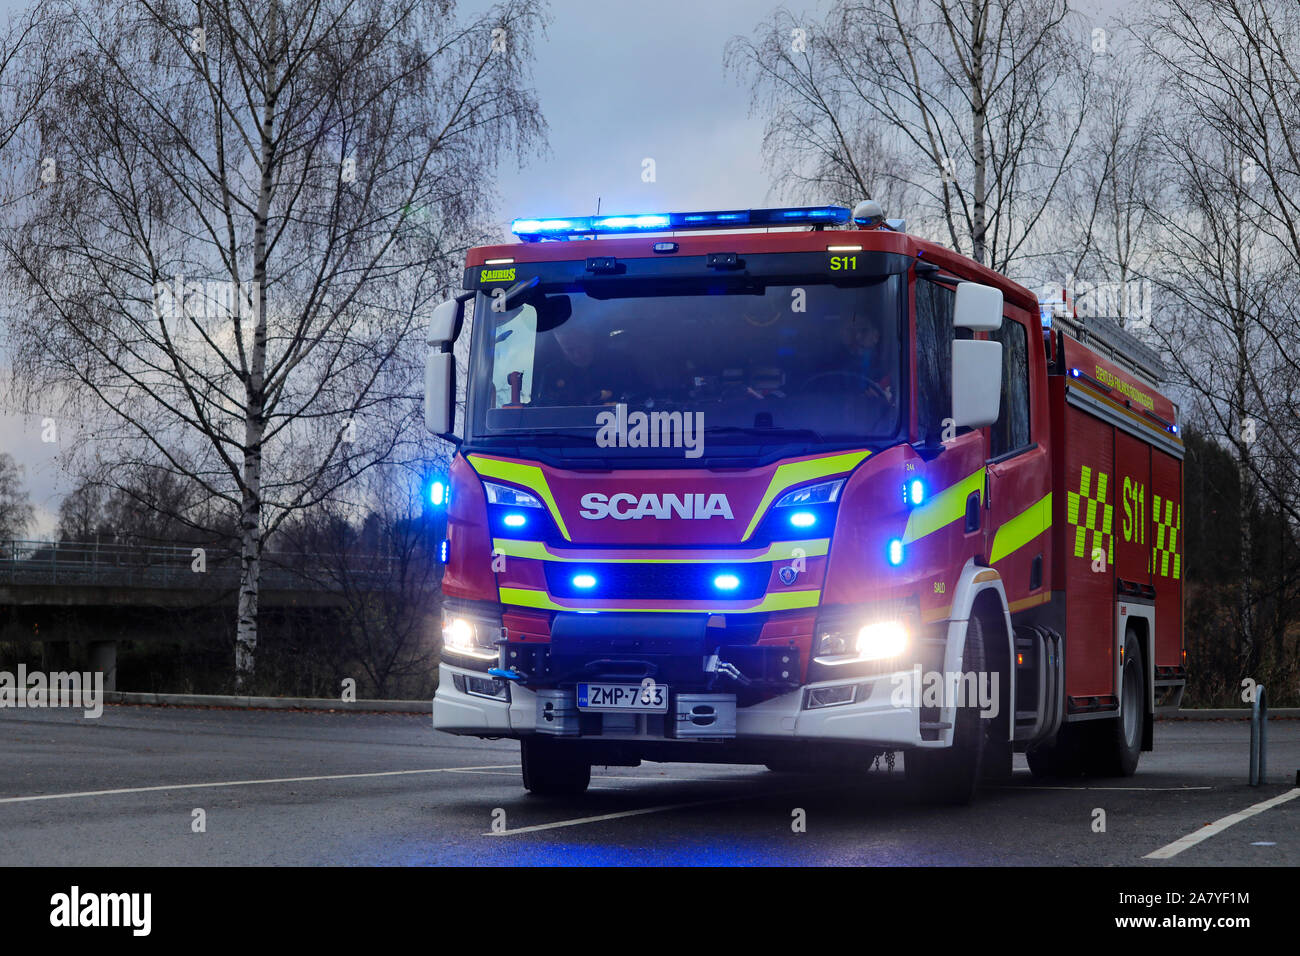 New Scania P CrewCab fire truck with blue lights on. Salo, Finland. November 3, 2019. Stock Photo